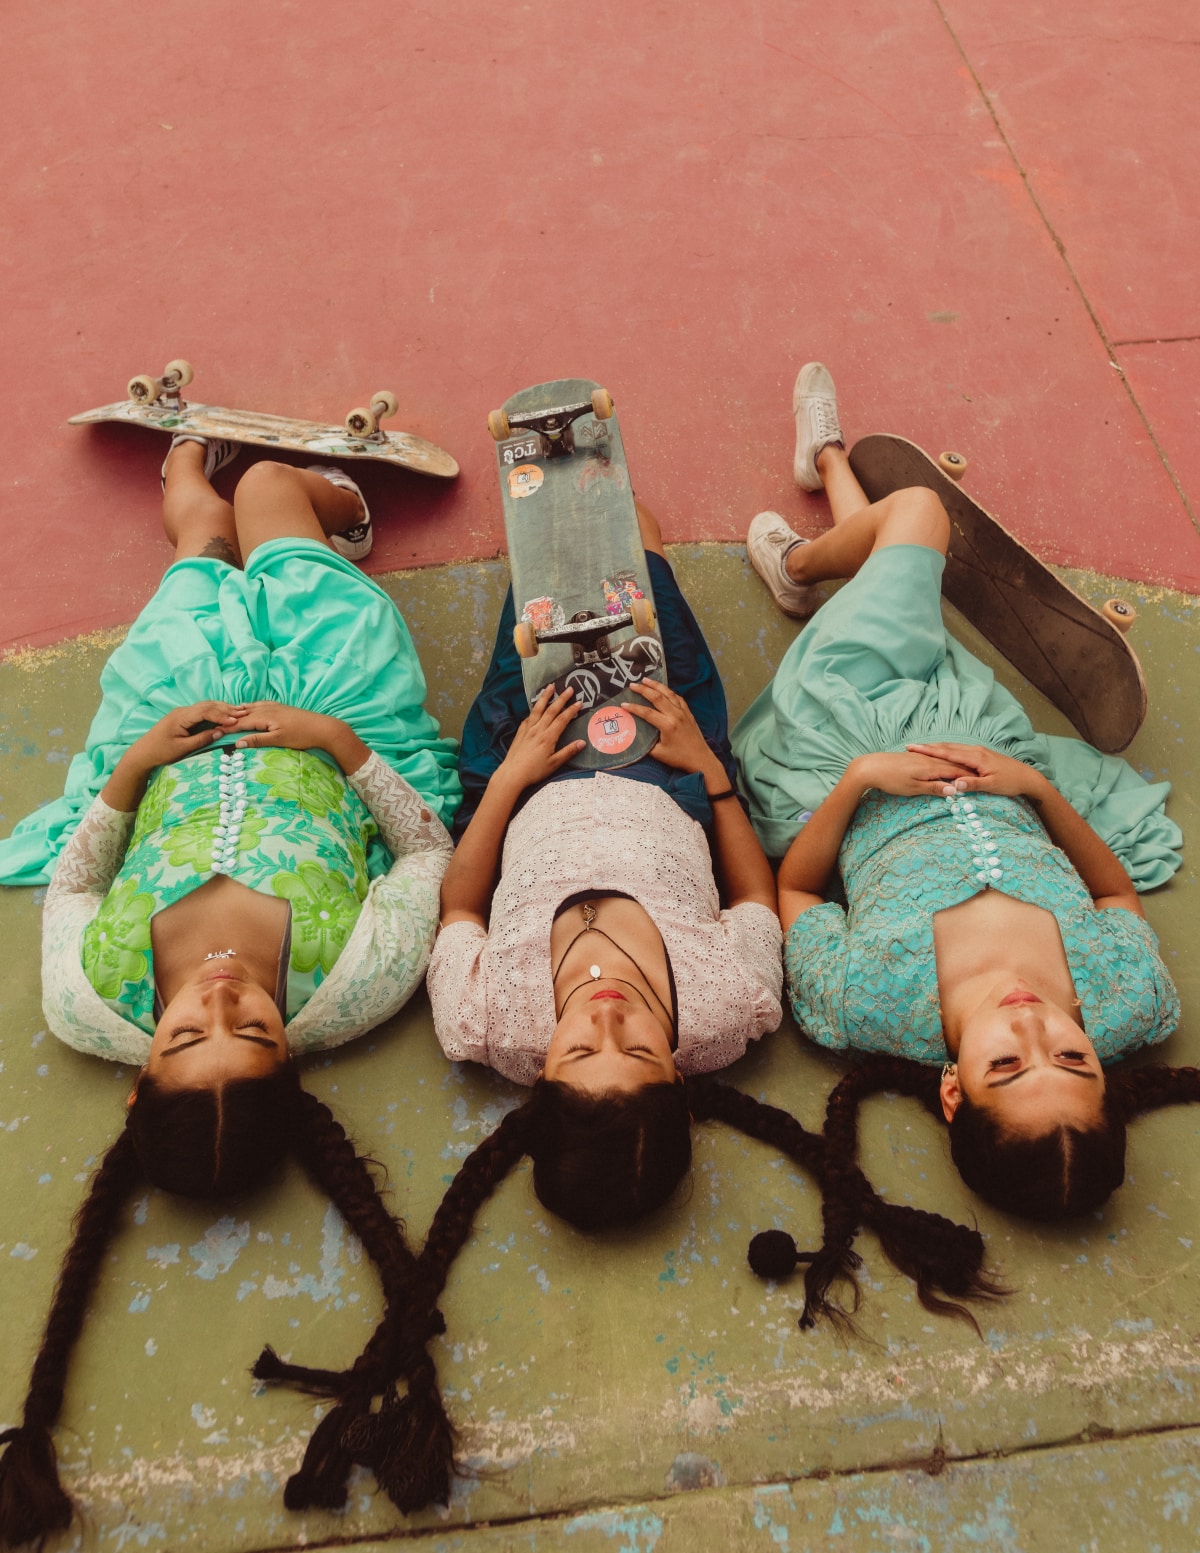 Cholitas Skaters from Bolivia Fly on Their Skateboards in This Series of Empowering Portraits